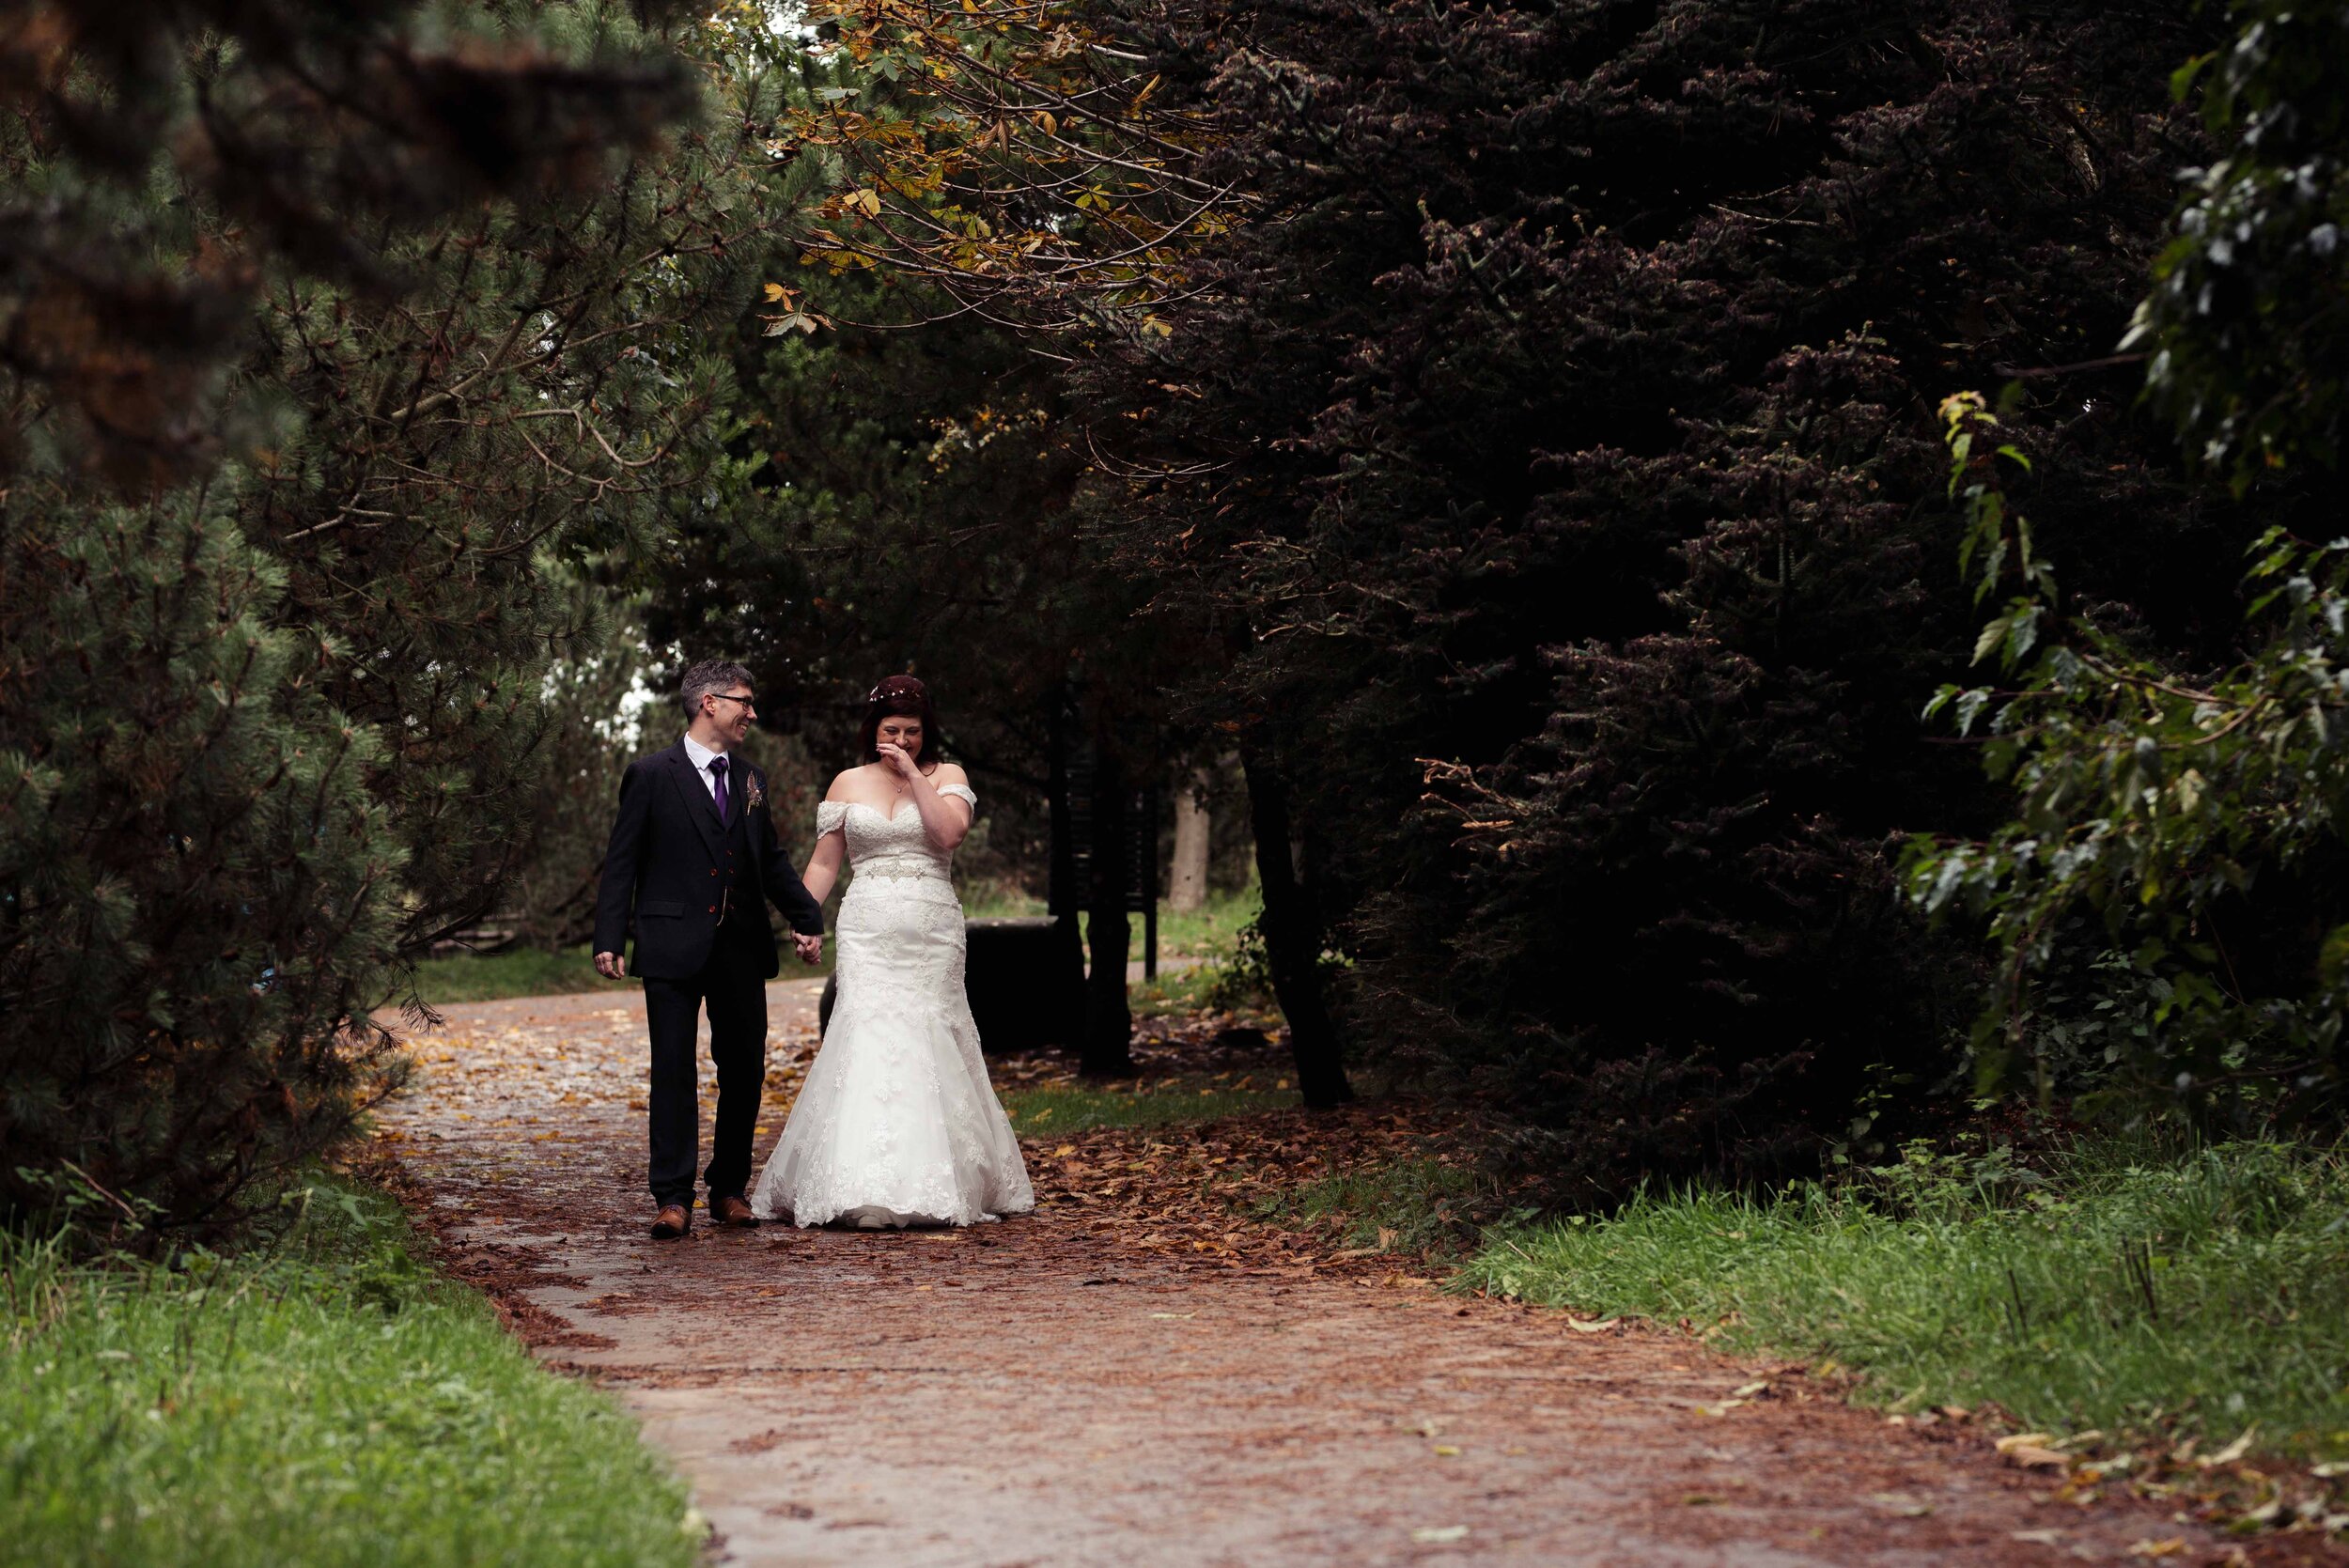 Bride and groom walking together through the trees during their portraits